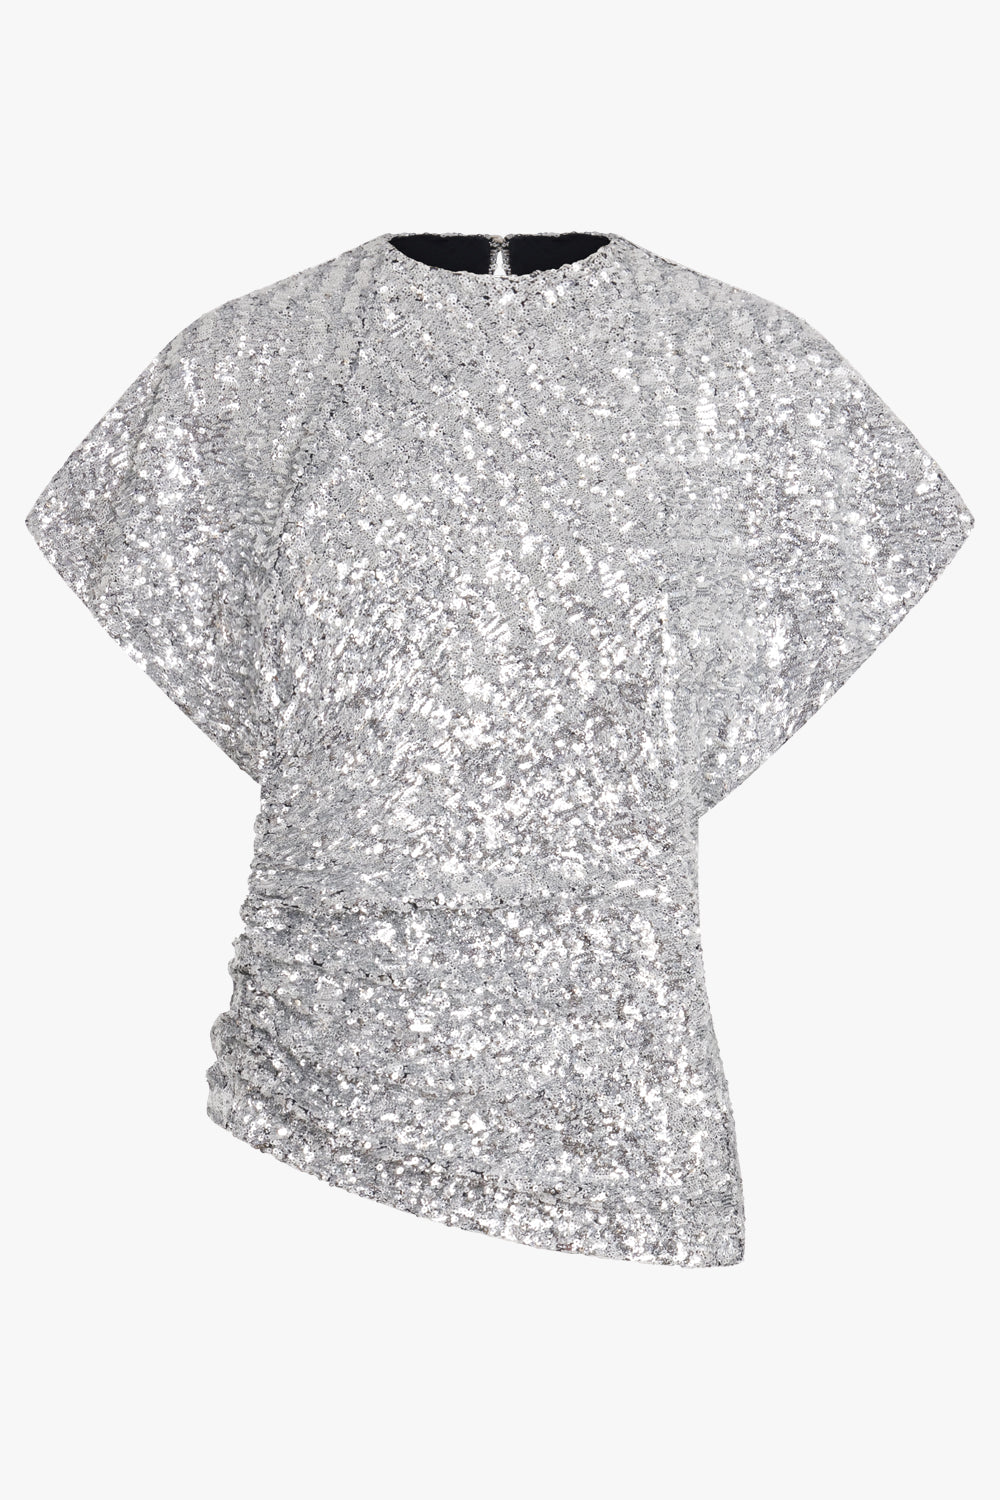 RABANNE RTW ASYMMETRIC RUCHED DETAIL SEQUIN TOP | SILVER